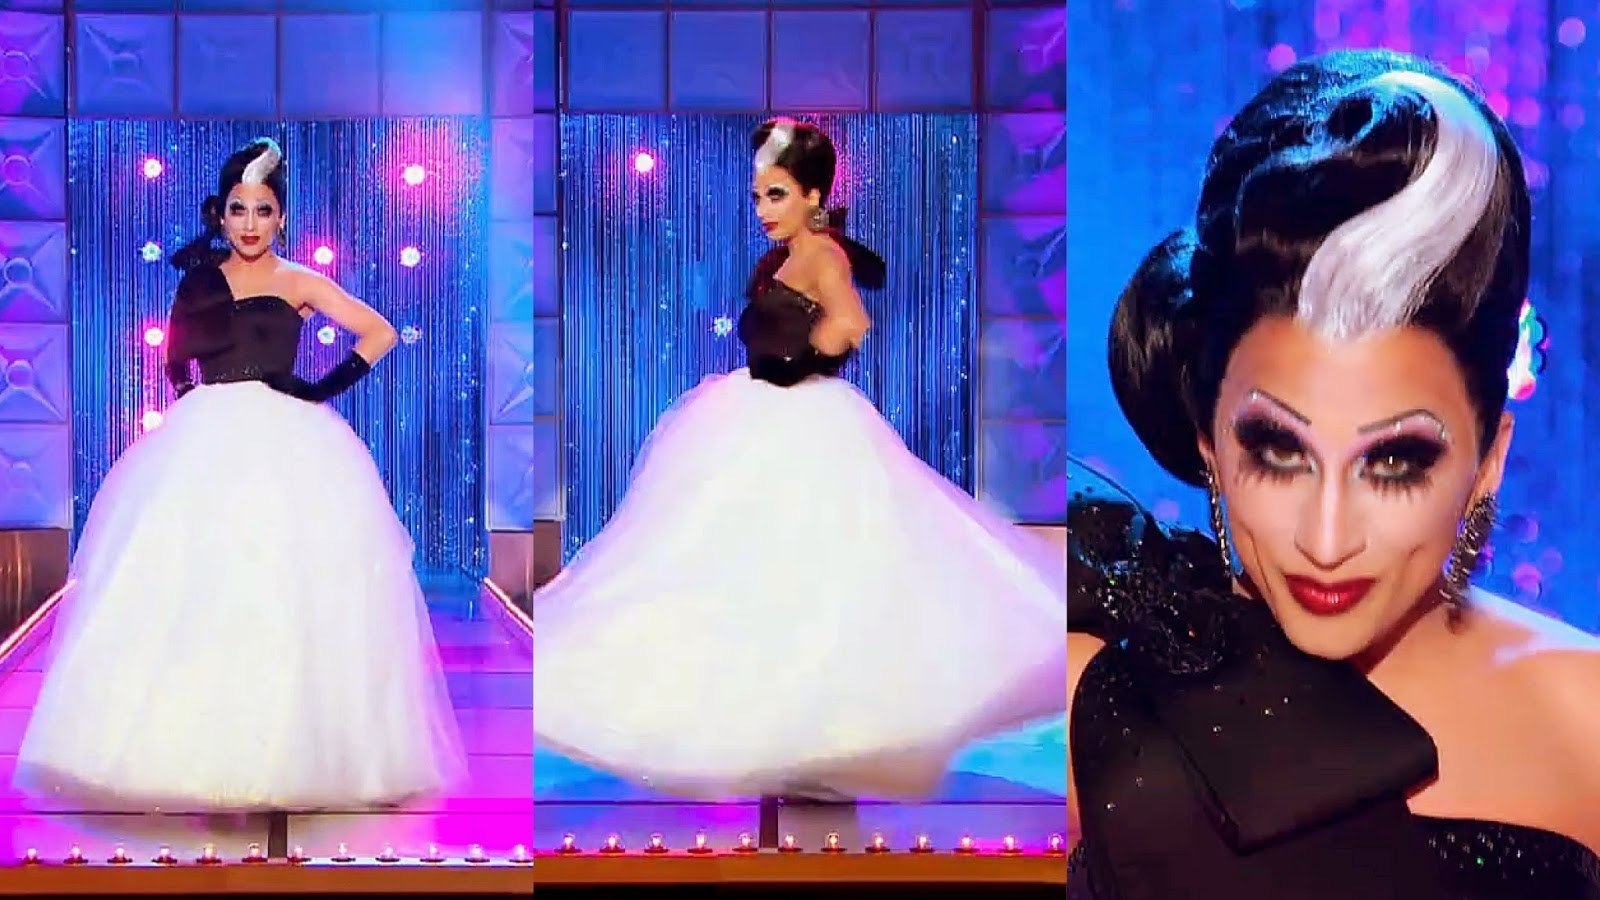 Drag queen Bianca Del Rio wearing a black and white ball gown